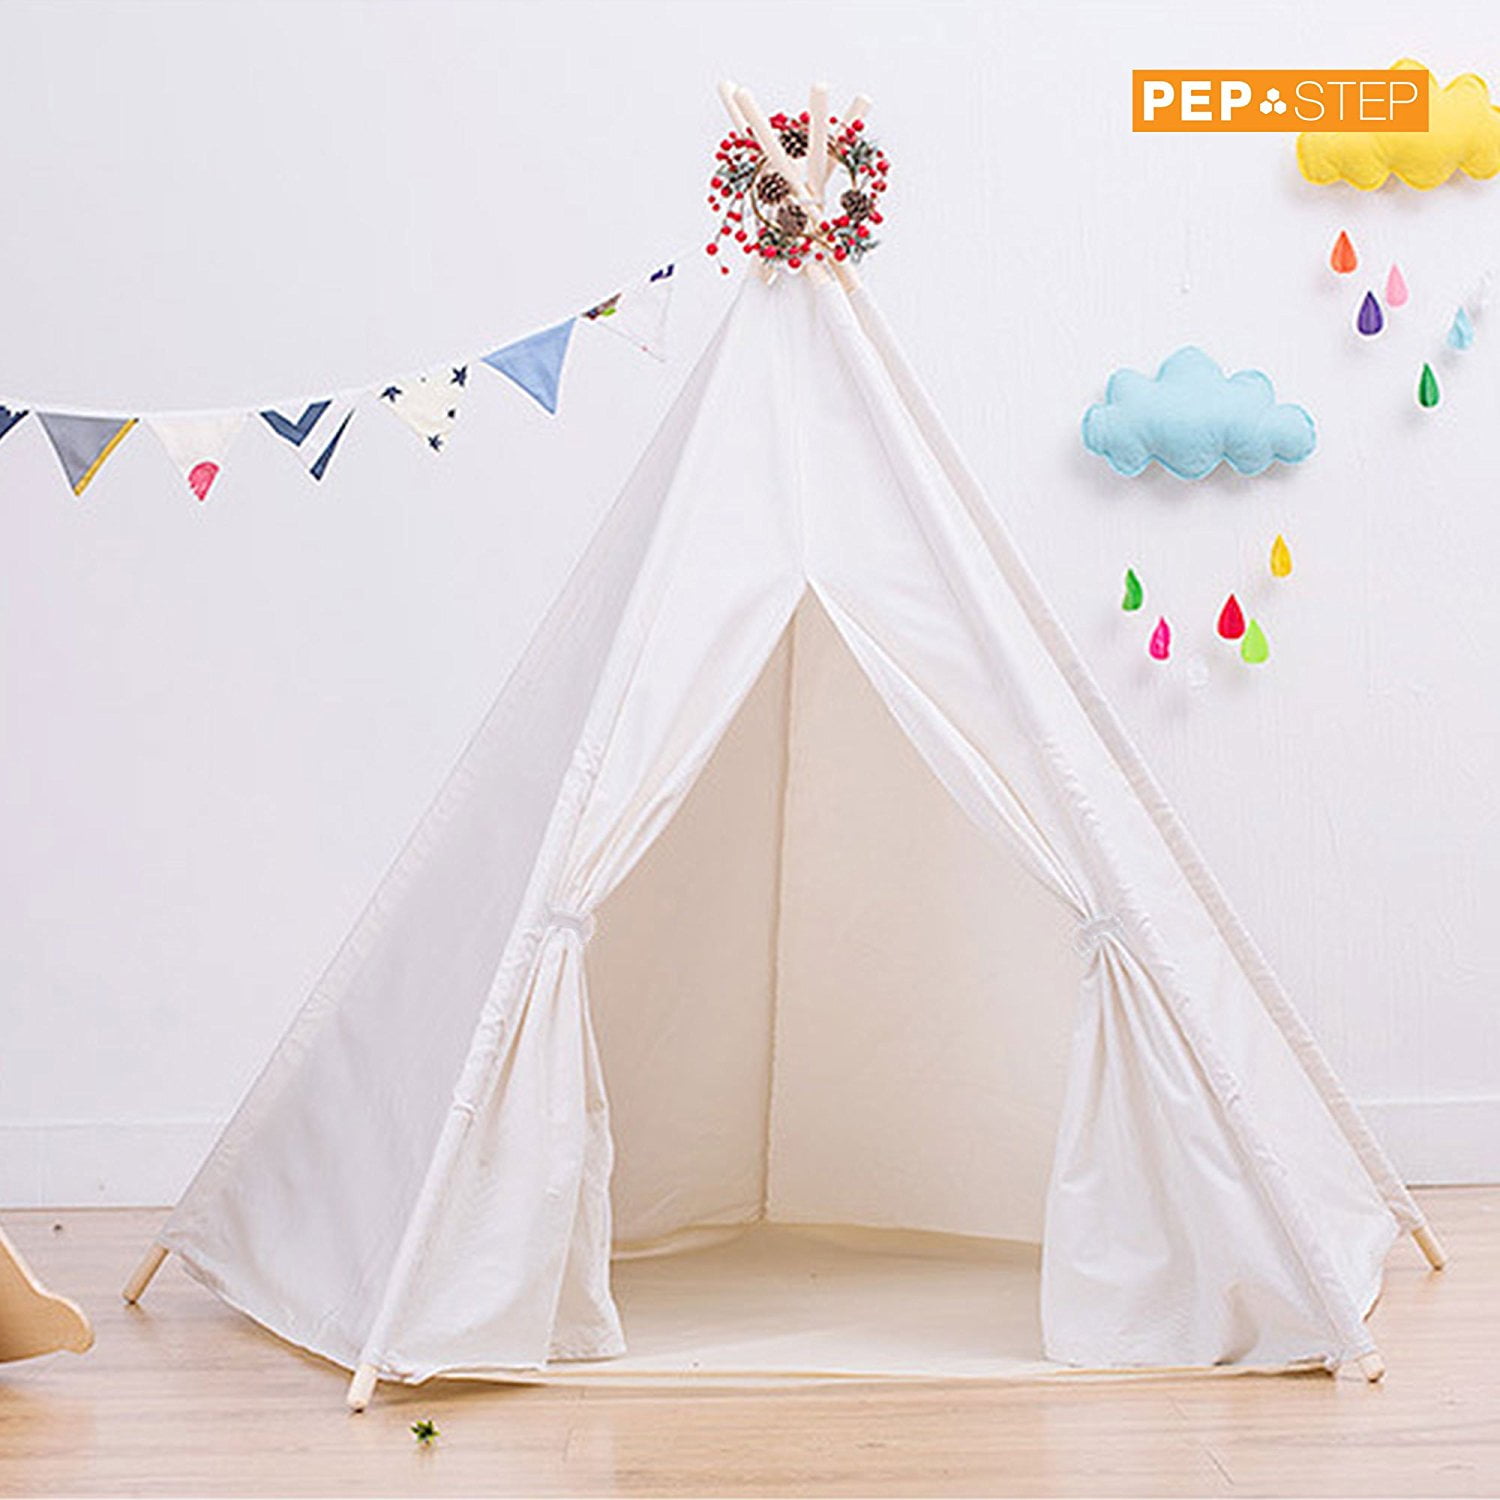 Custom tepee tent for kid Personalized children play house tent